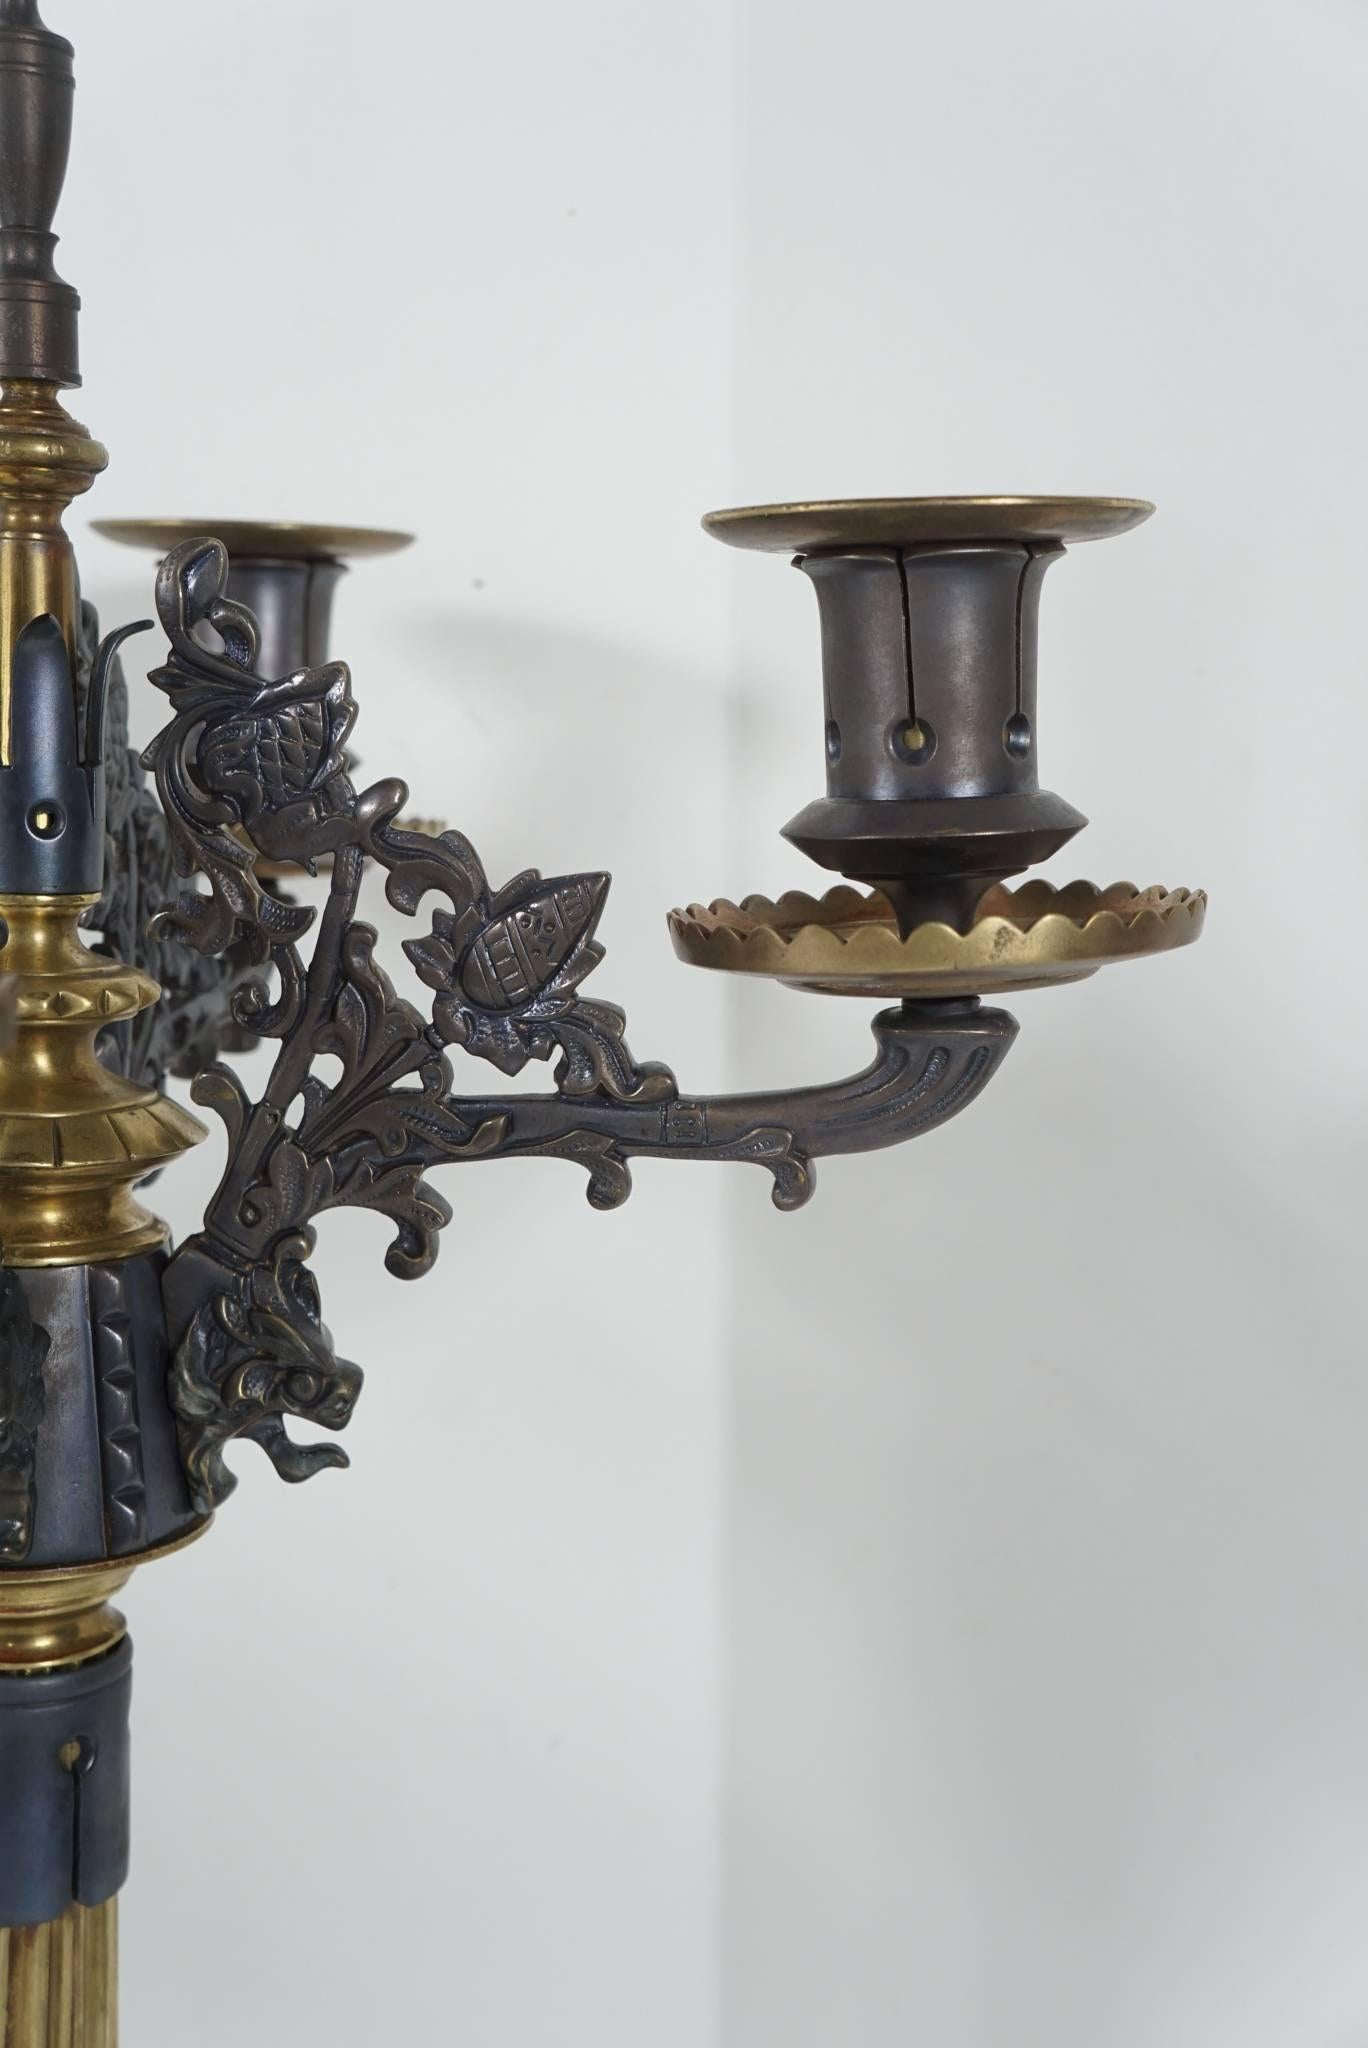 Pair of Patinated and Polished Bronze Renaissance Revival Candelabra In Good Condition For Sale In Hudson, NY